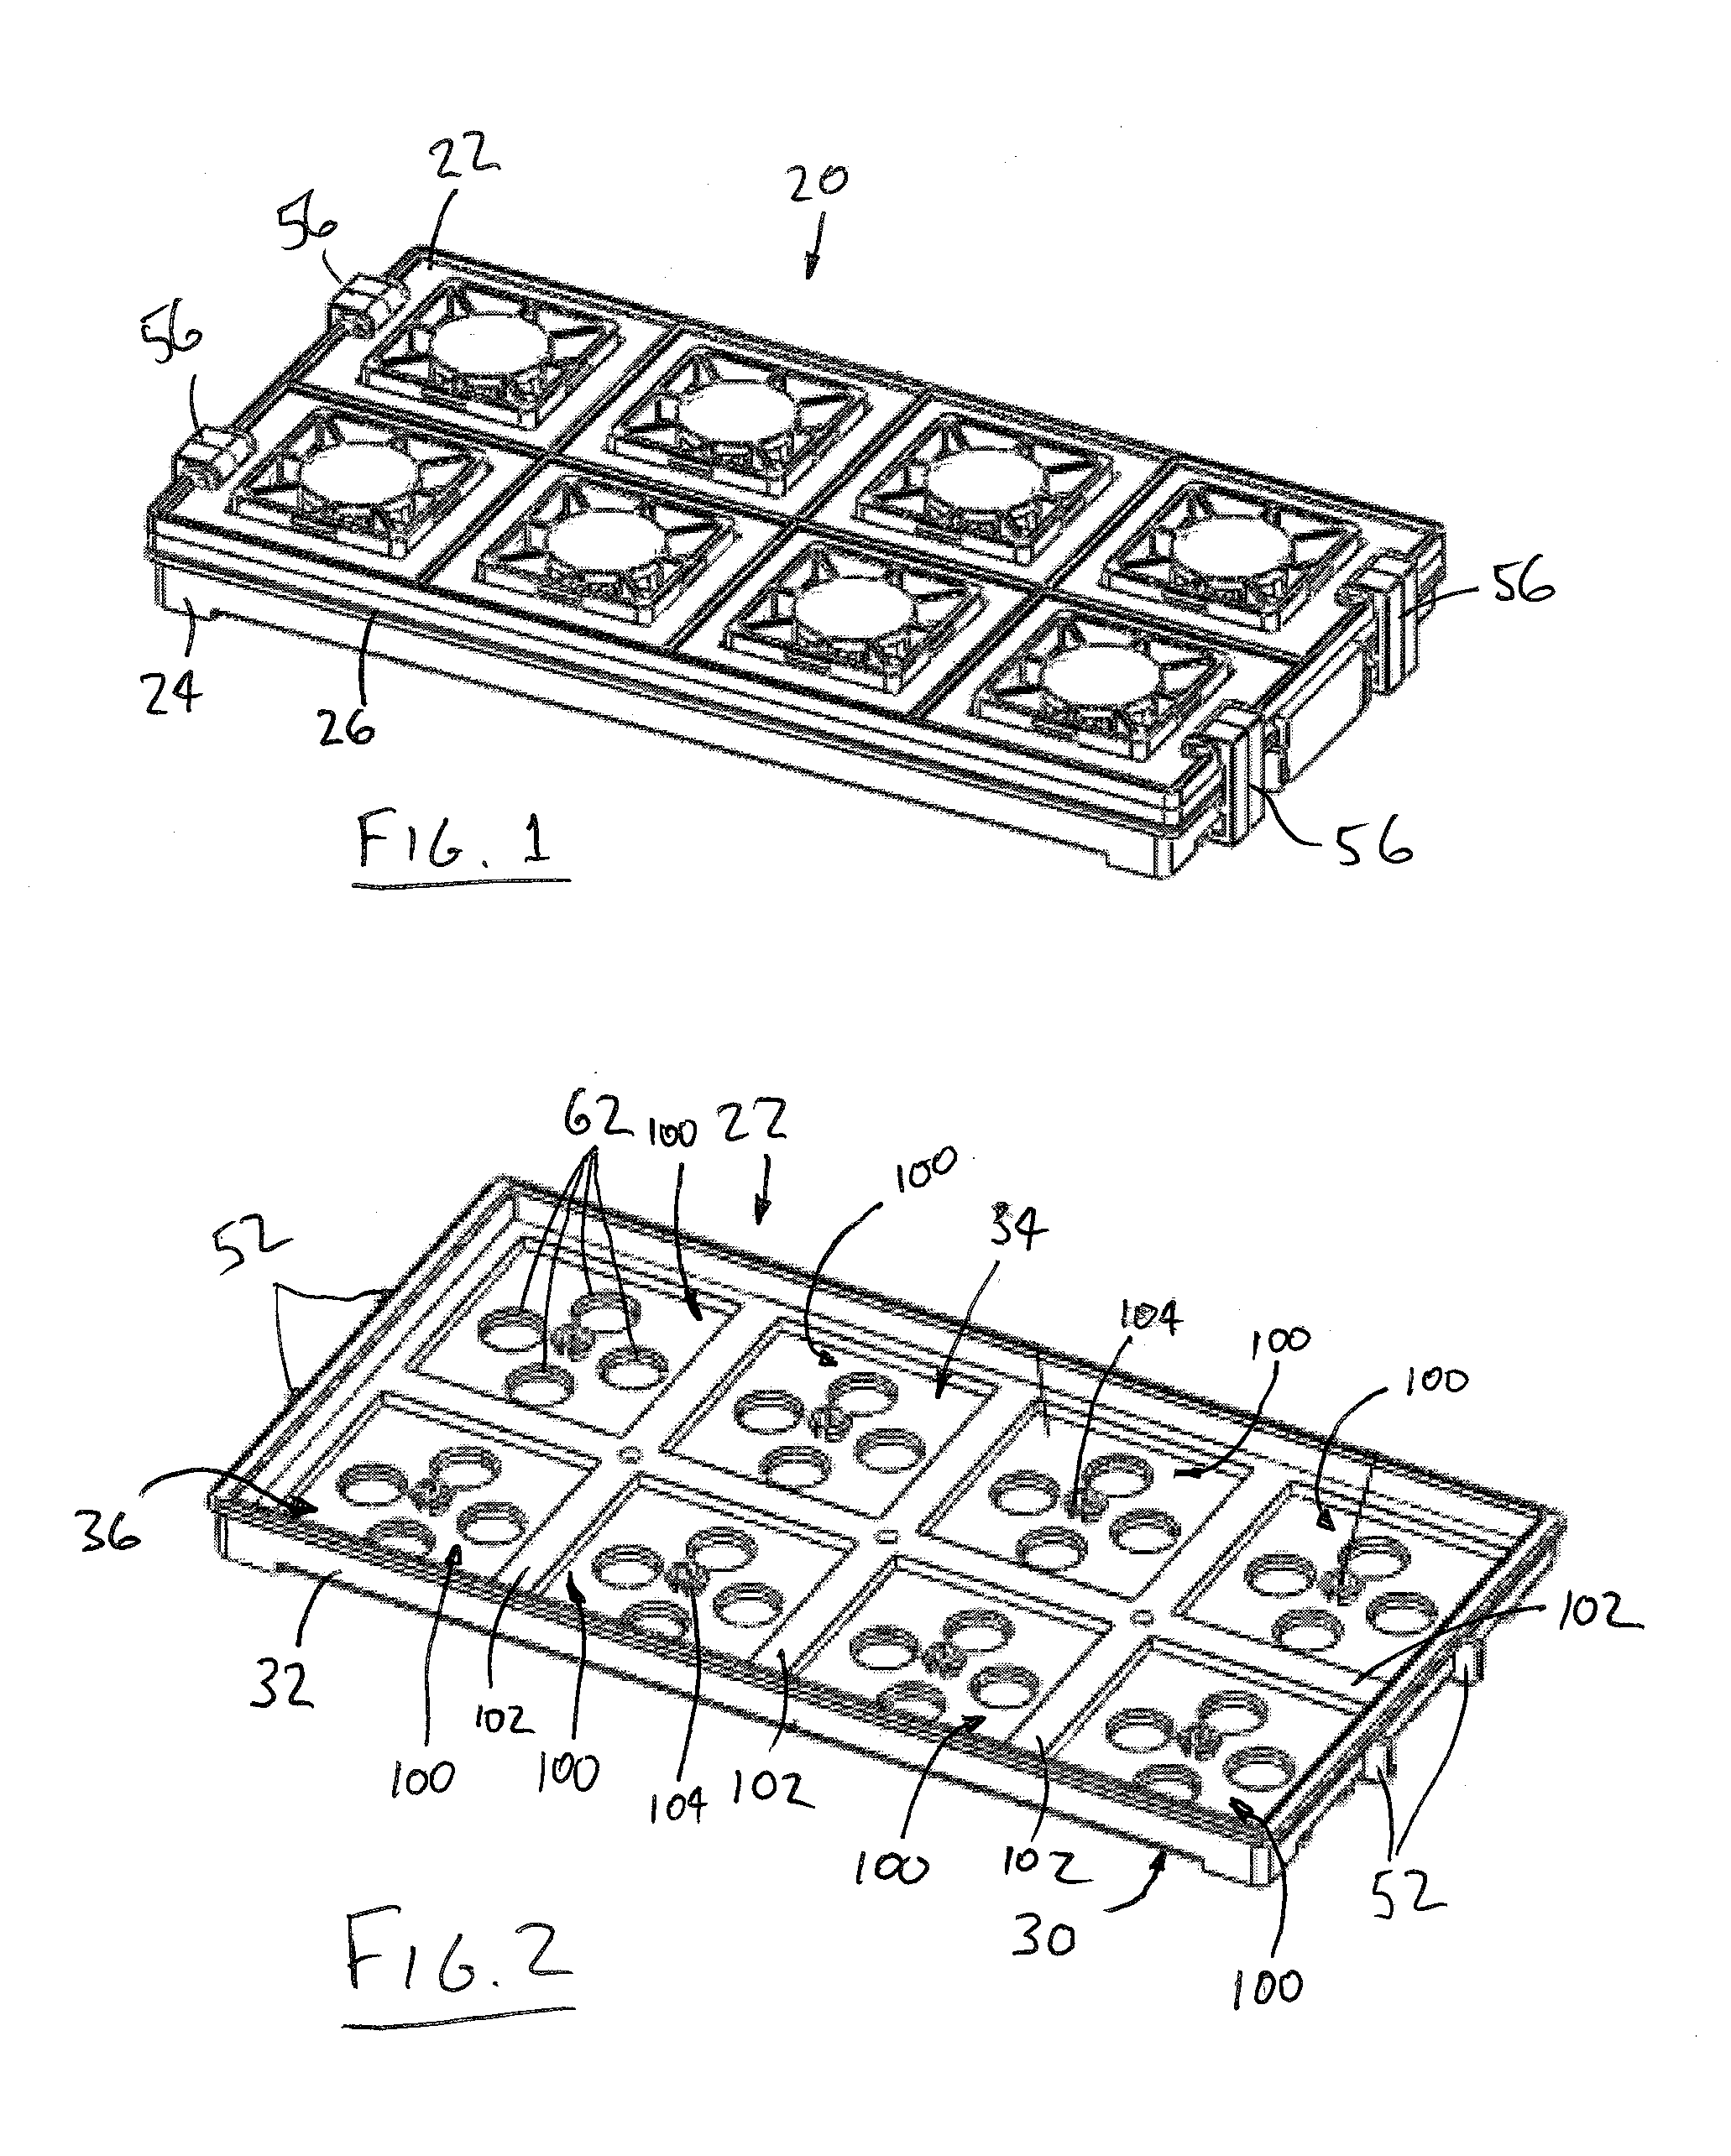 Tissue retrieval, storage, and explant culture device for the derivation of stem cells